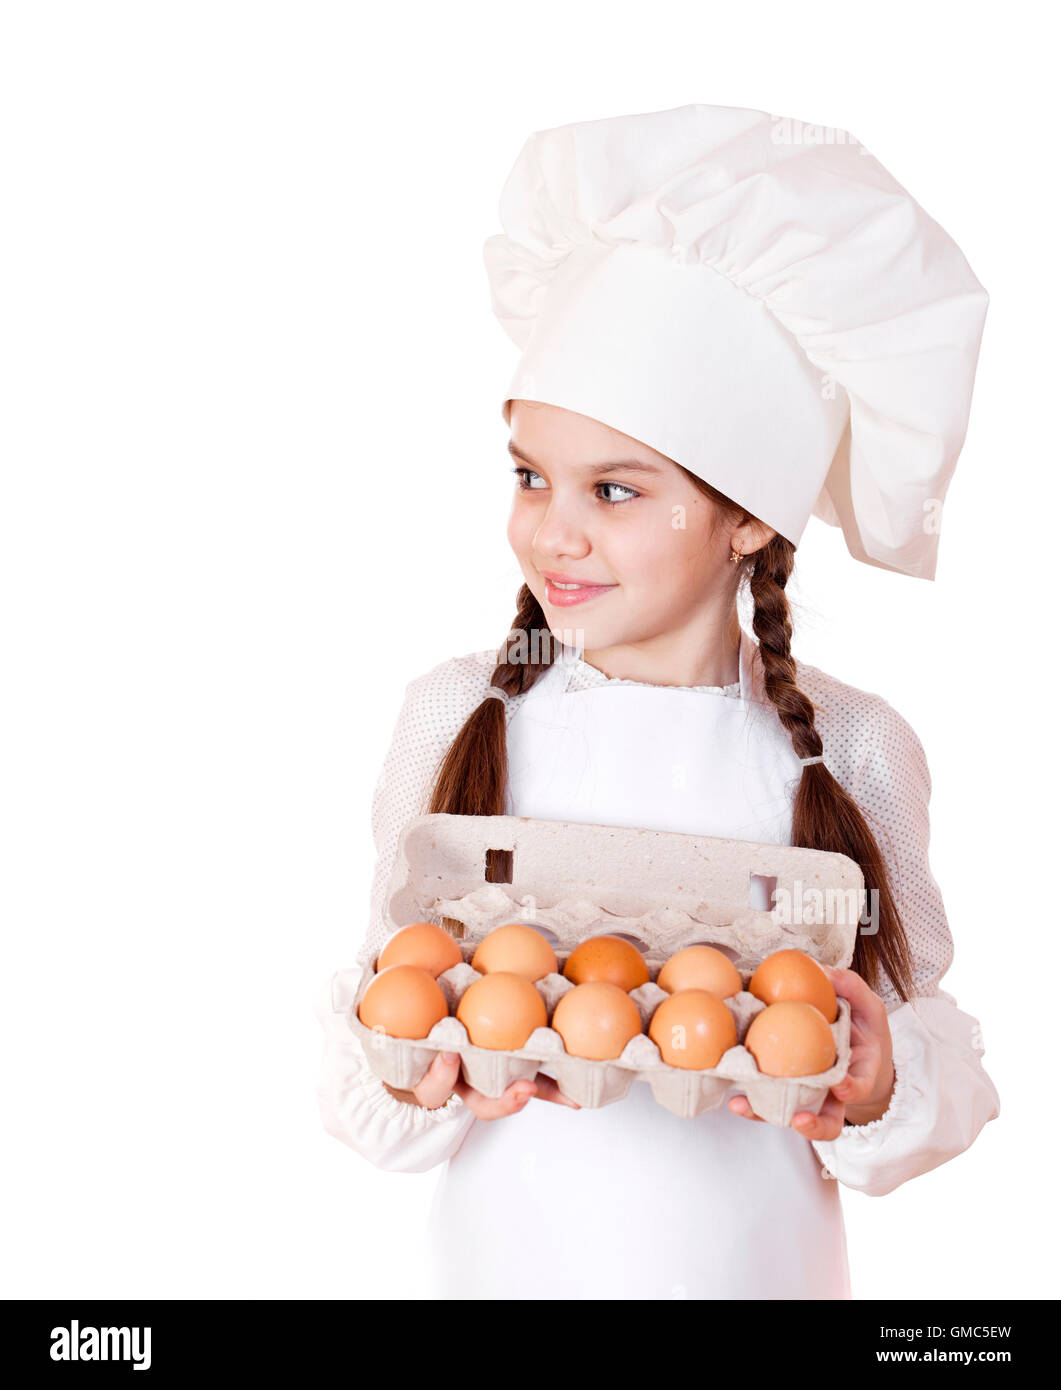 Portrait of a little girl in a white apron holding box of raw eggs, isolated on white background Stock Photo